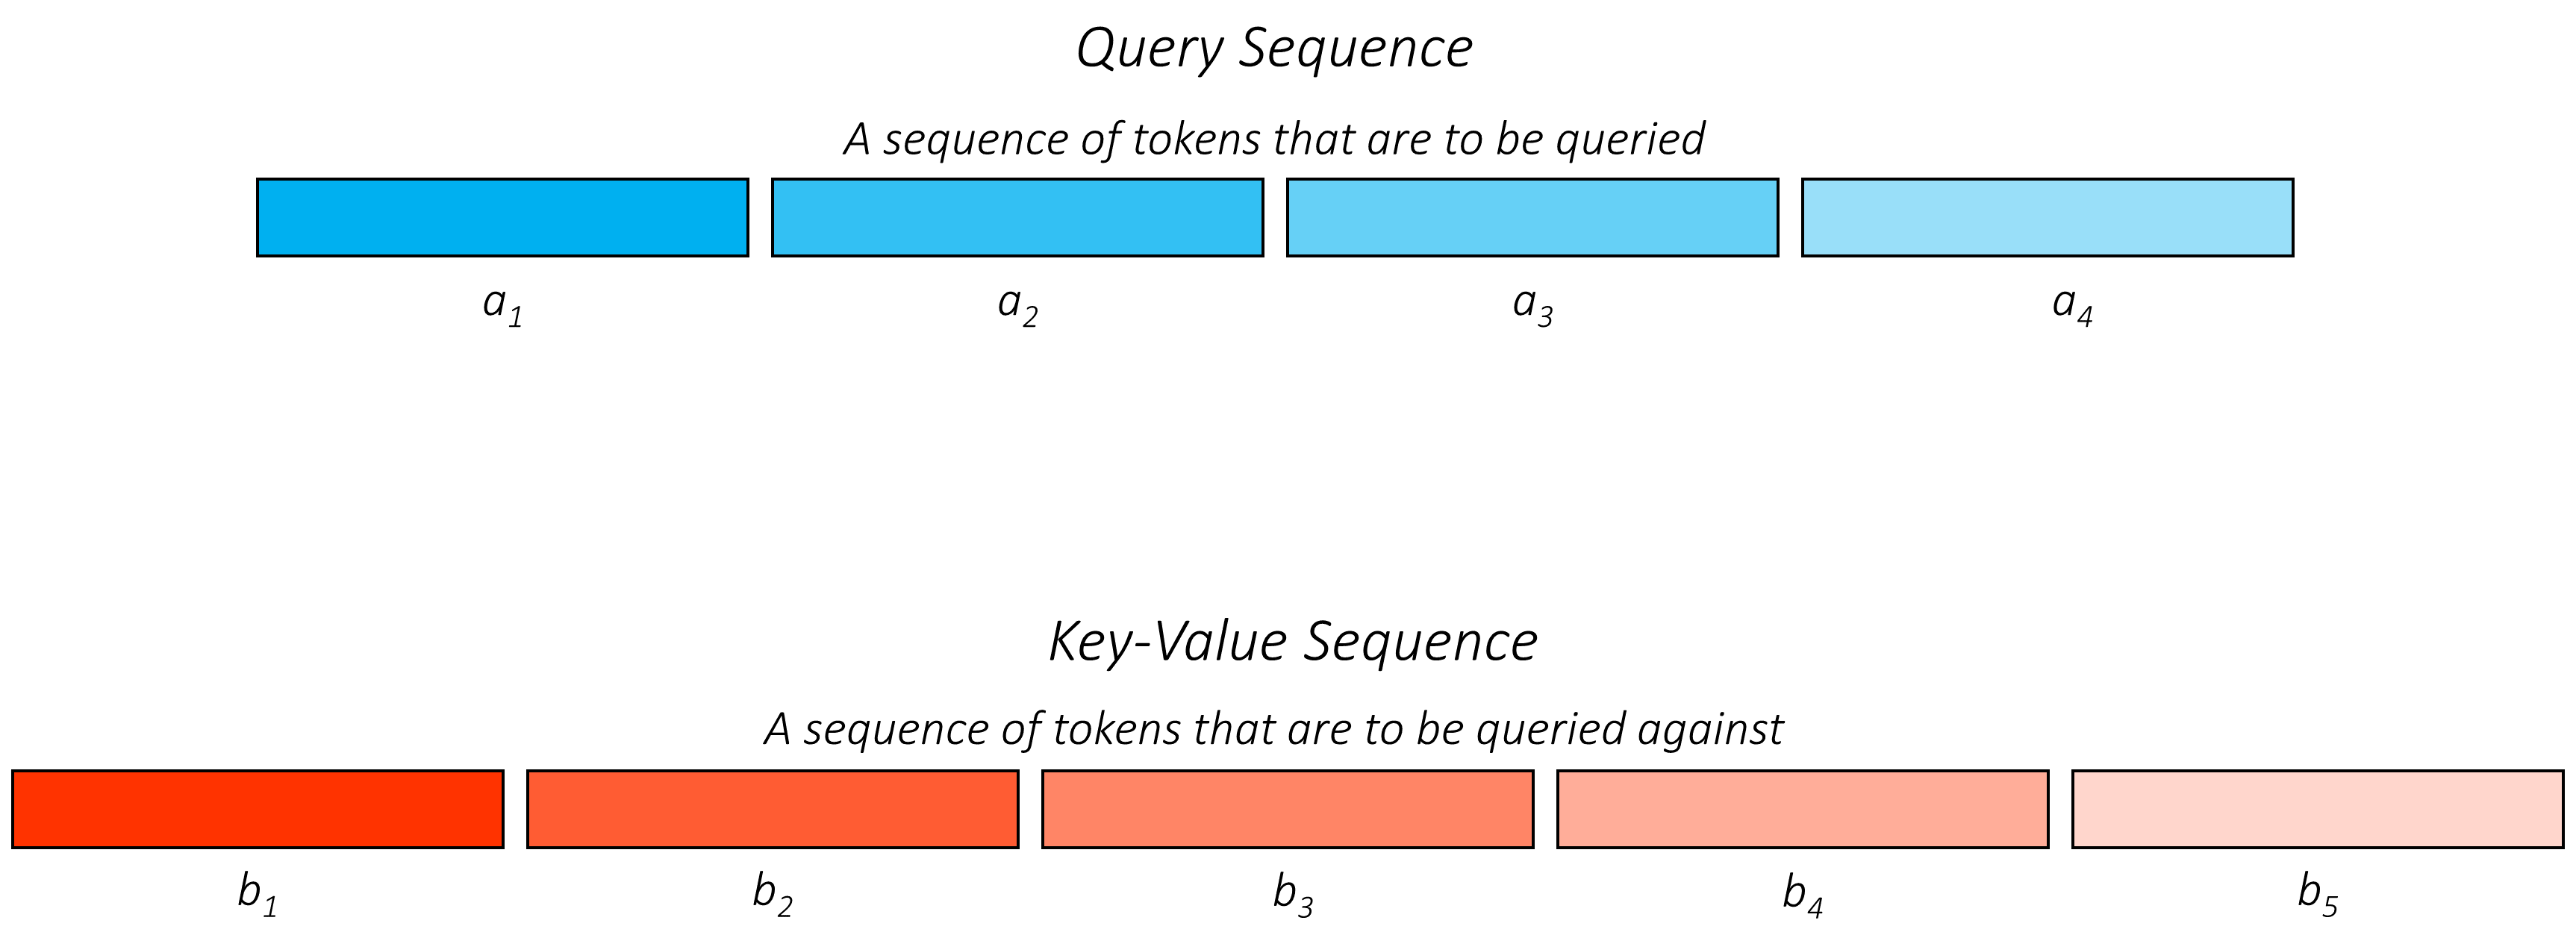 query_key_value_sequences.PNG